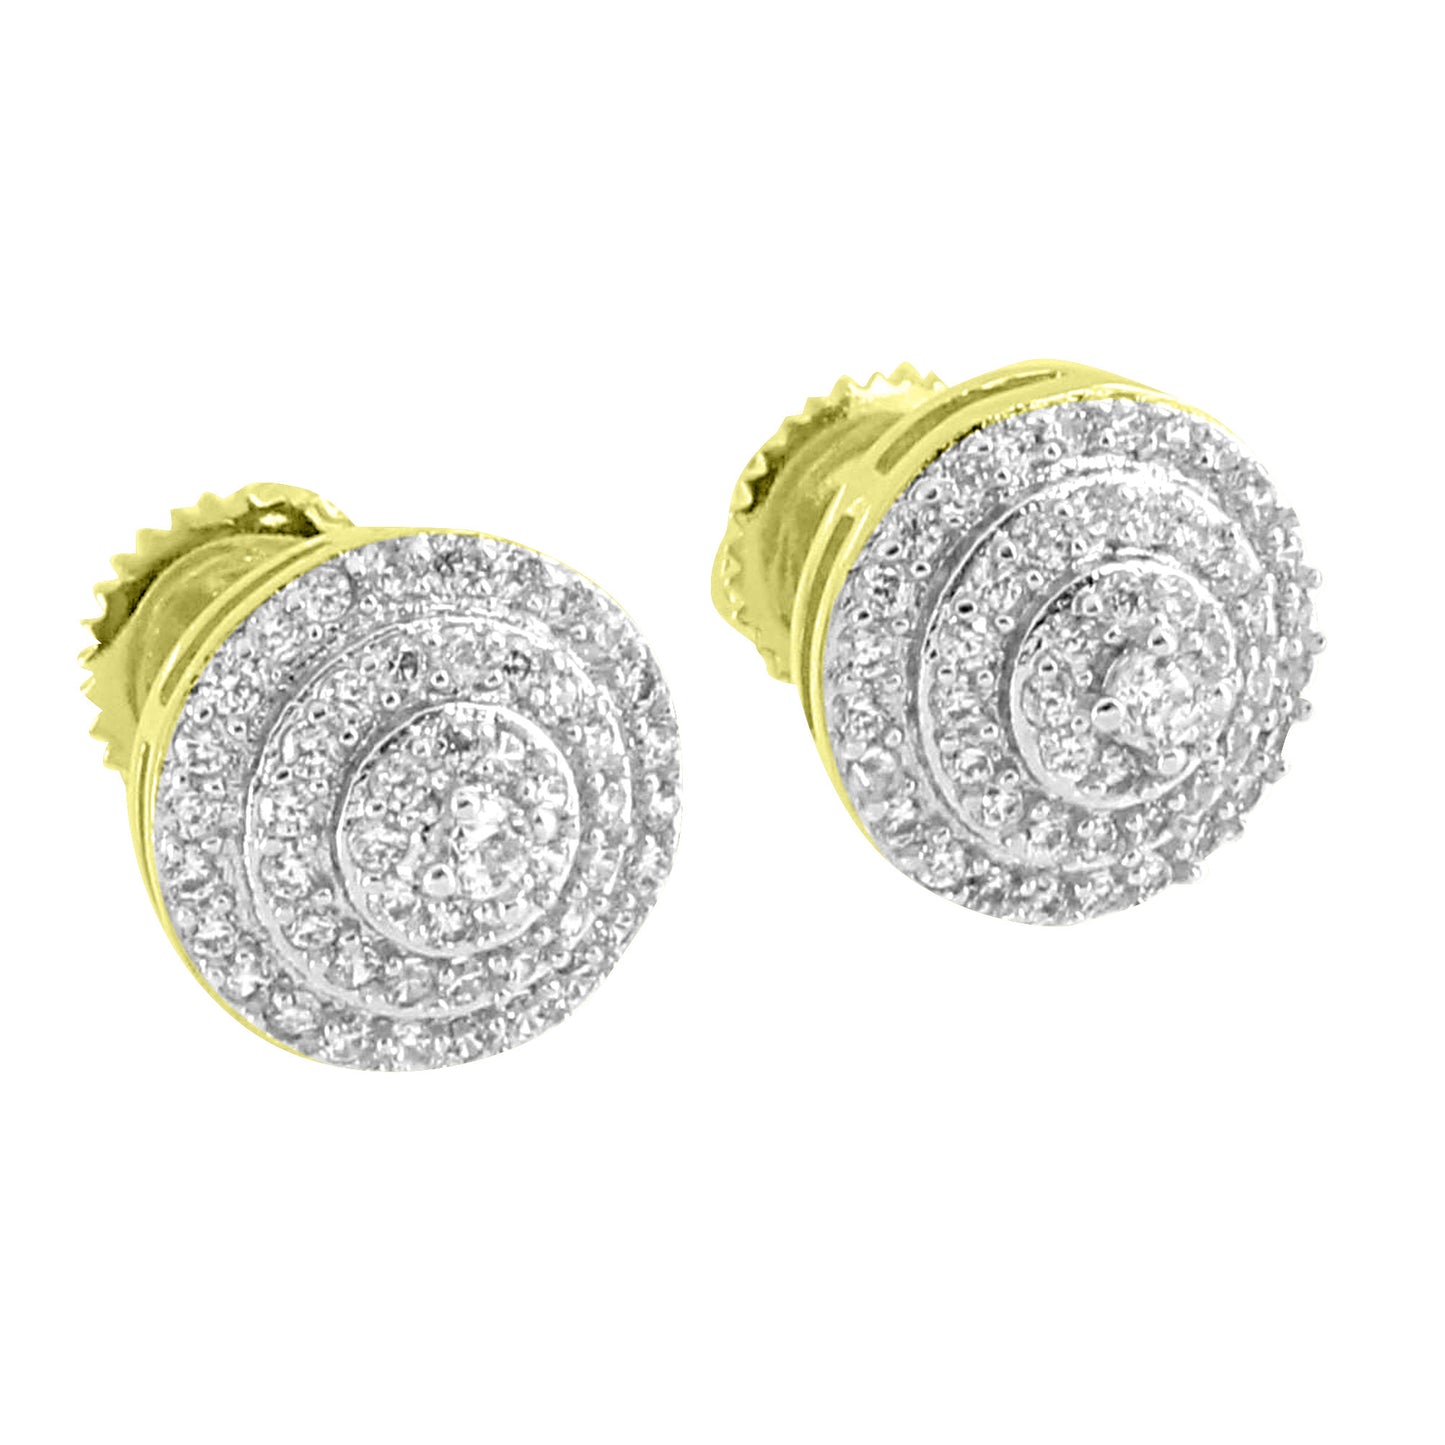 Solitaire Prong Set Earrings Round 14k Gold Finish Simulated Diamonds Screw Back Studs